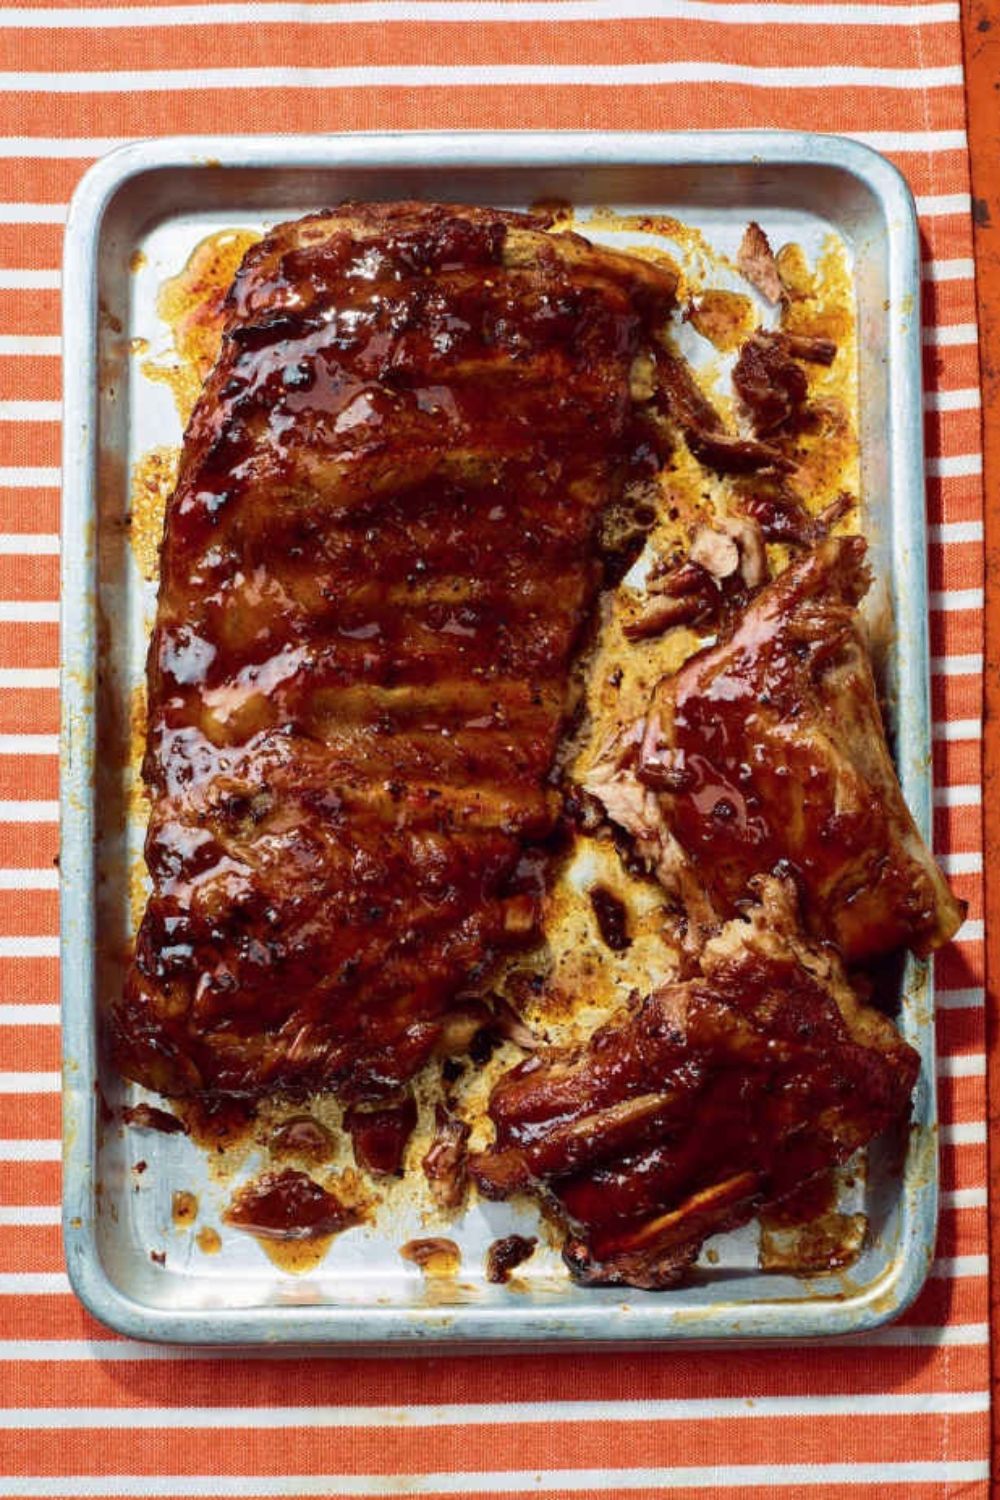 Slow Cooker Bbq Ribs